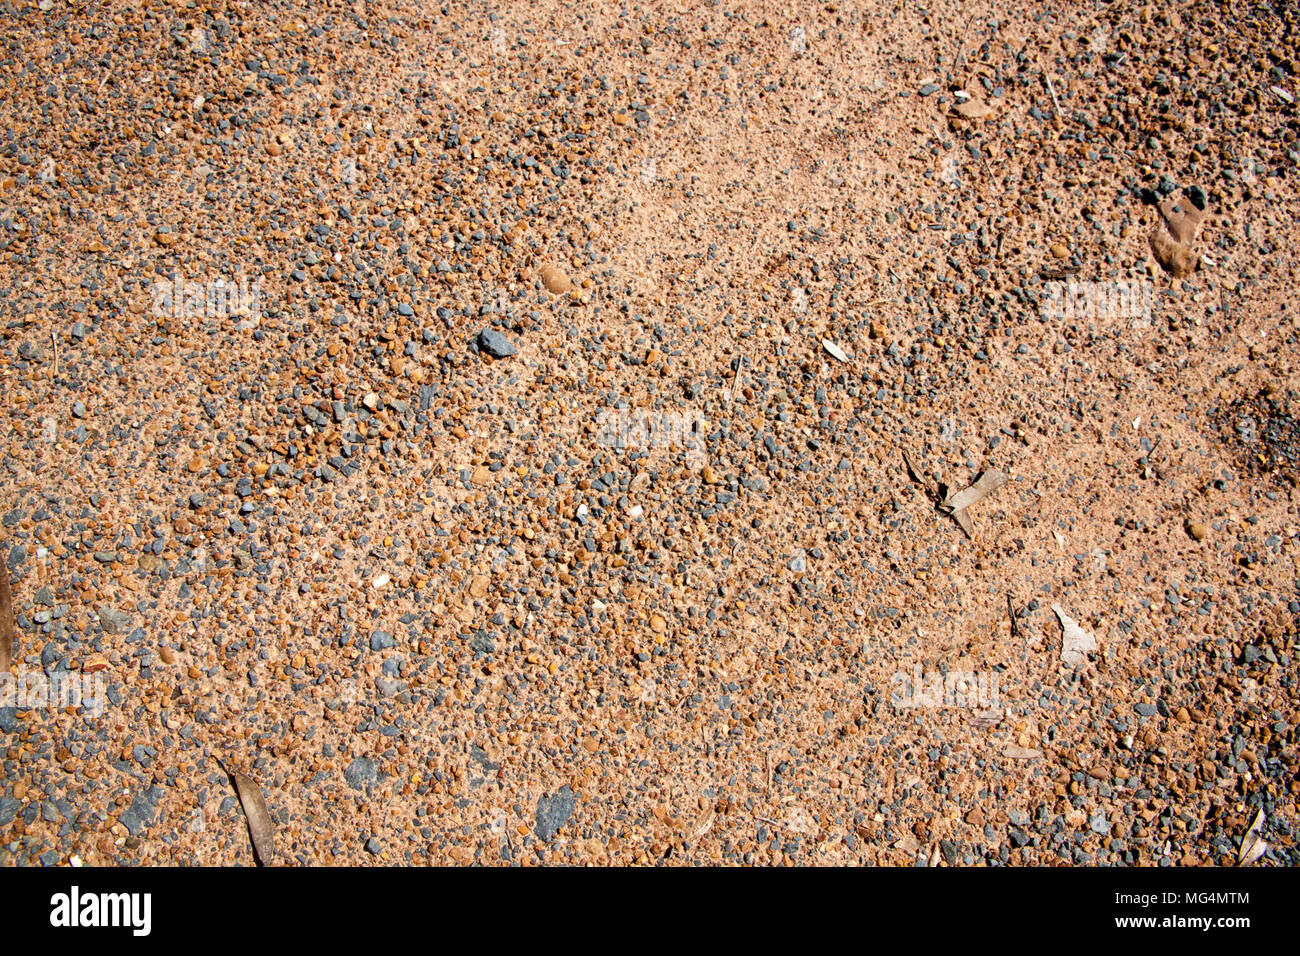 Brown Gravel texture and small stone background. Sand and stones on the floor. The land is covered with stones Stock Photo